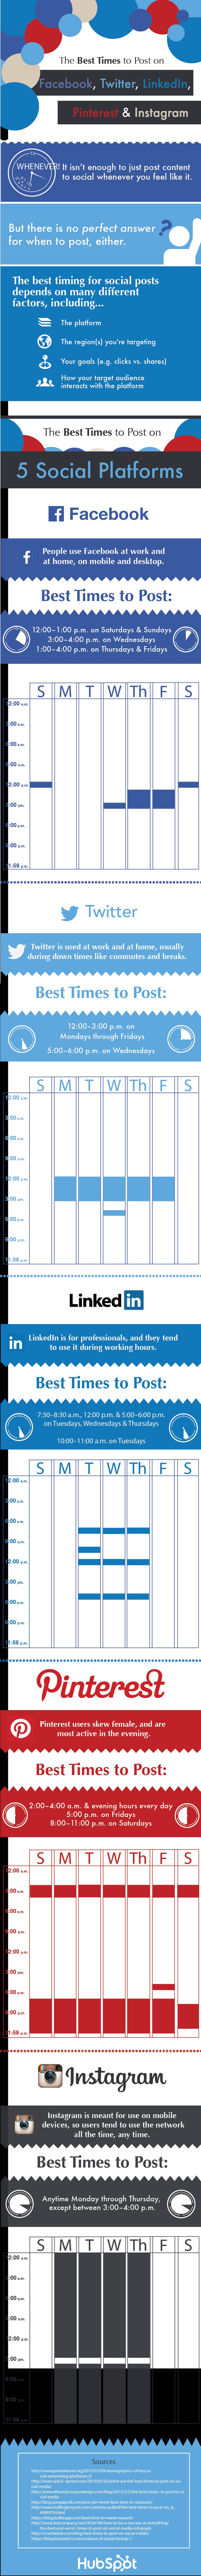 The Best Times to Post on Social Media Platform